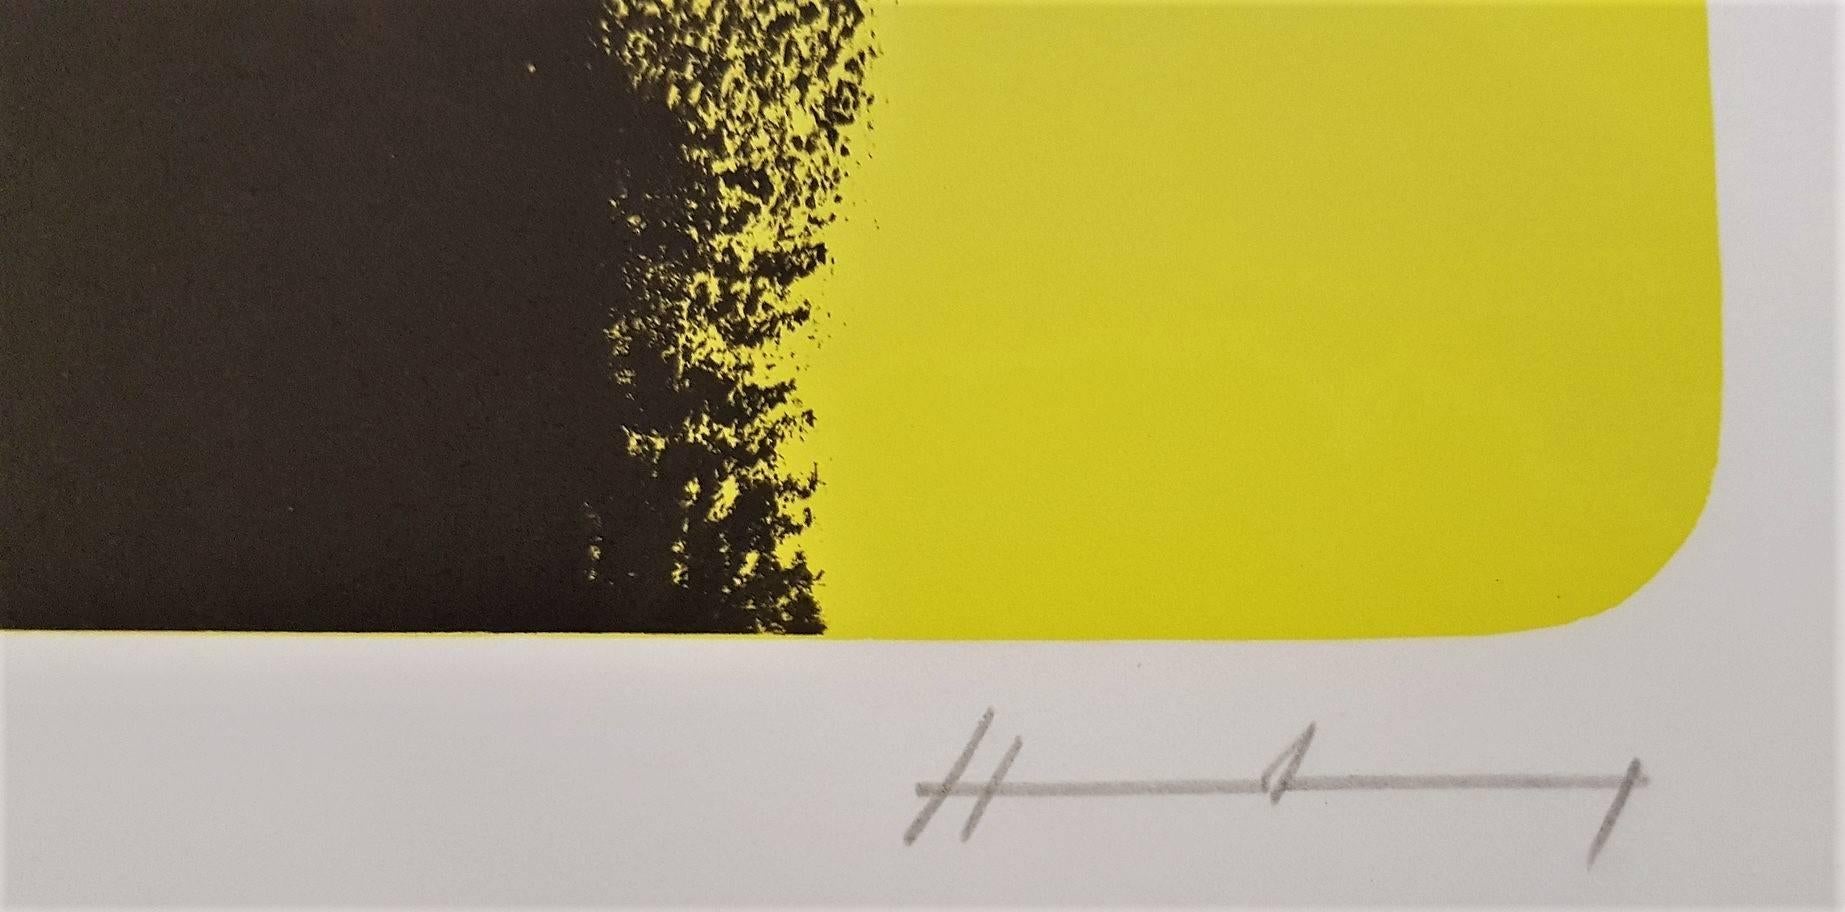 L-5-1974 - Contemporary Print by Hans Hartung